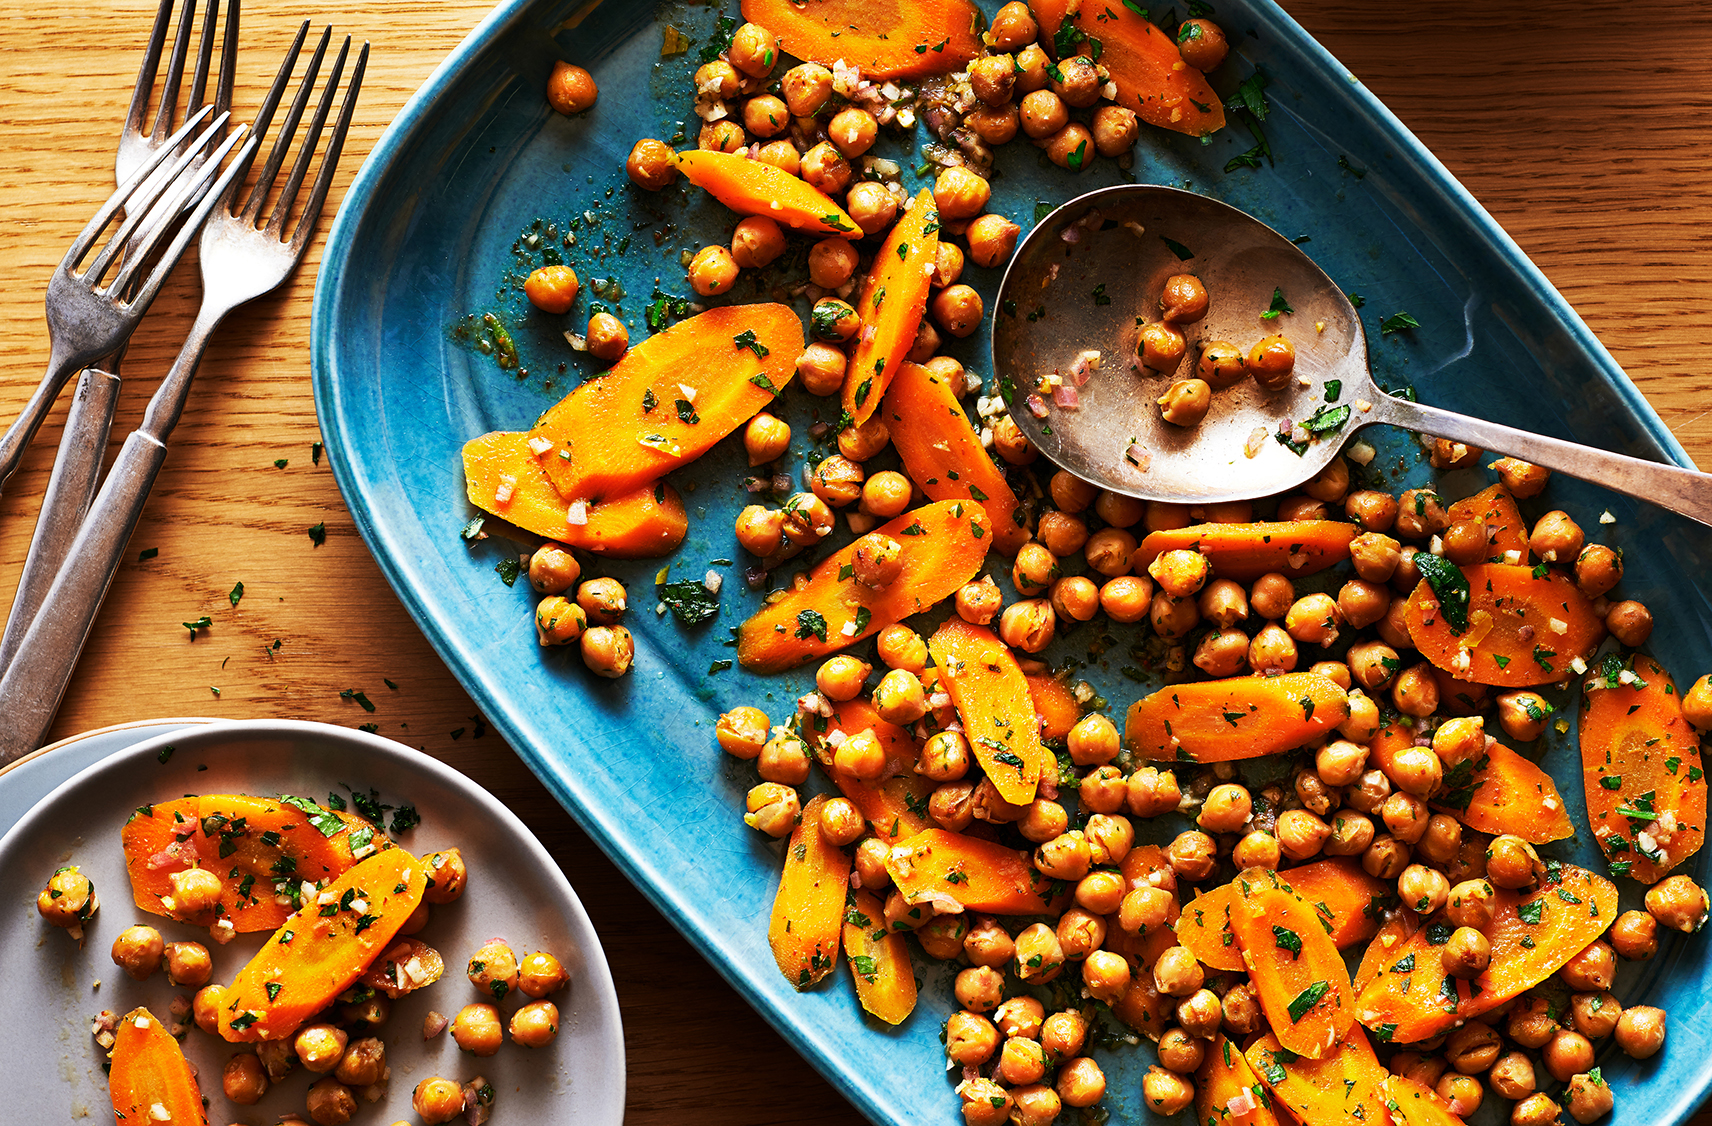 Small glasses filled with Moroccan carrot and roasted chickpea salad